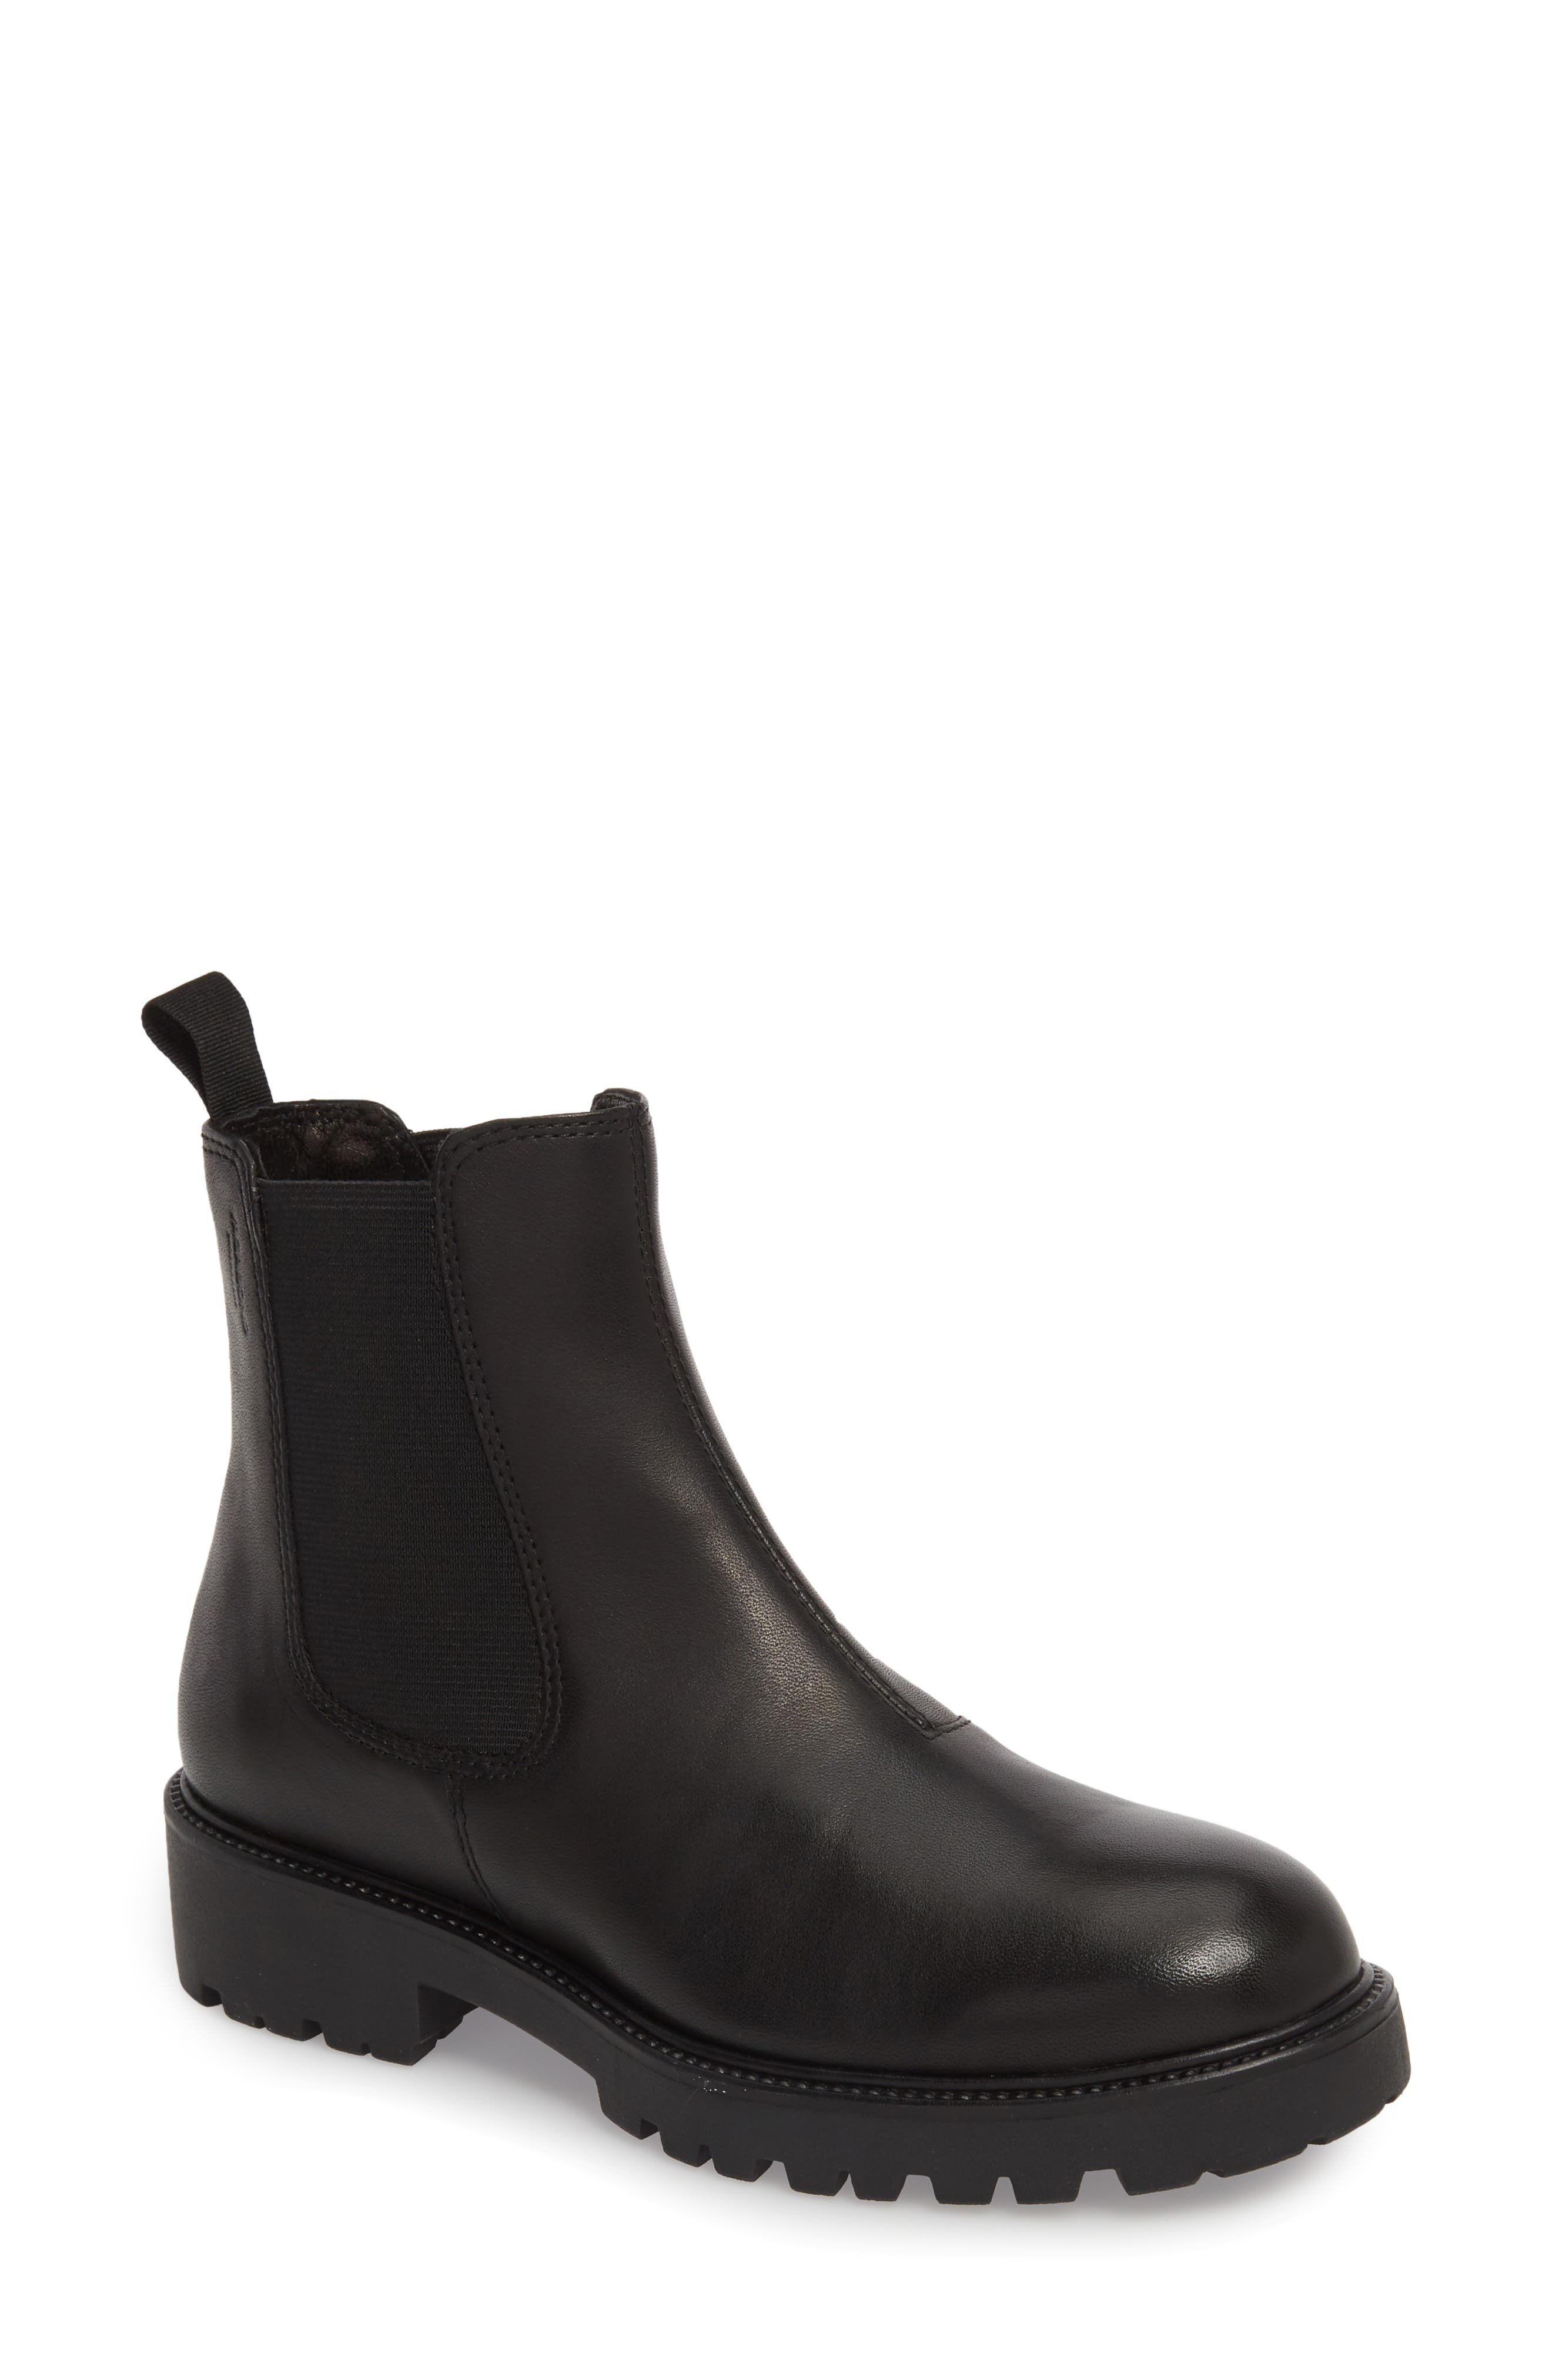 black chunky chelsea boots womens